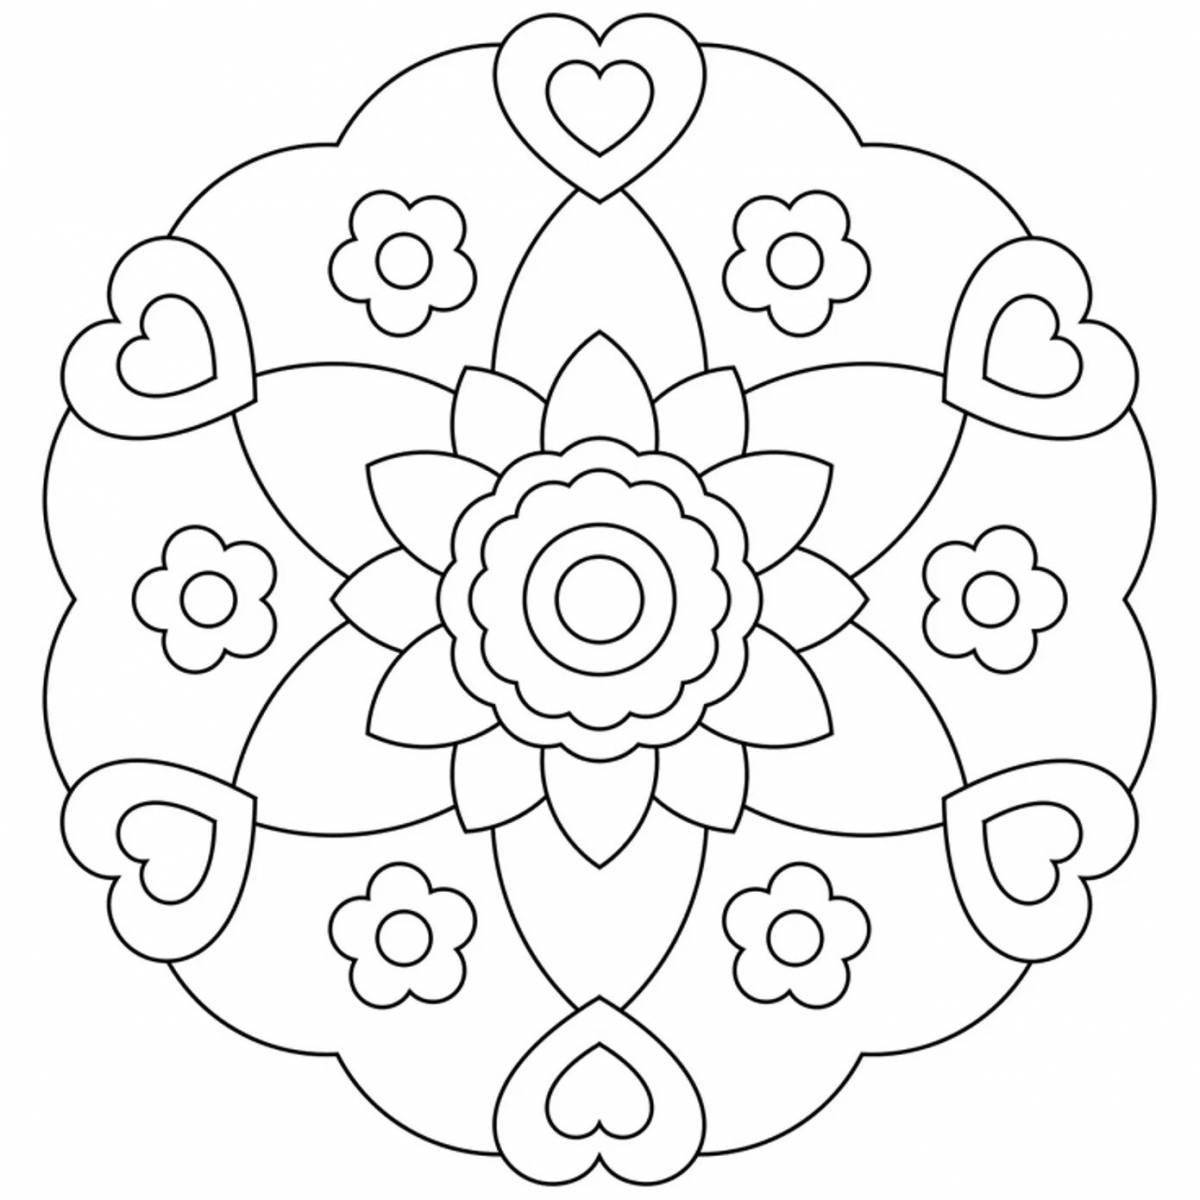 Cute coloring pages with small patterns